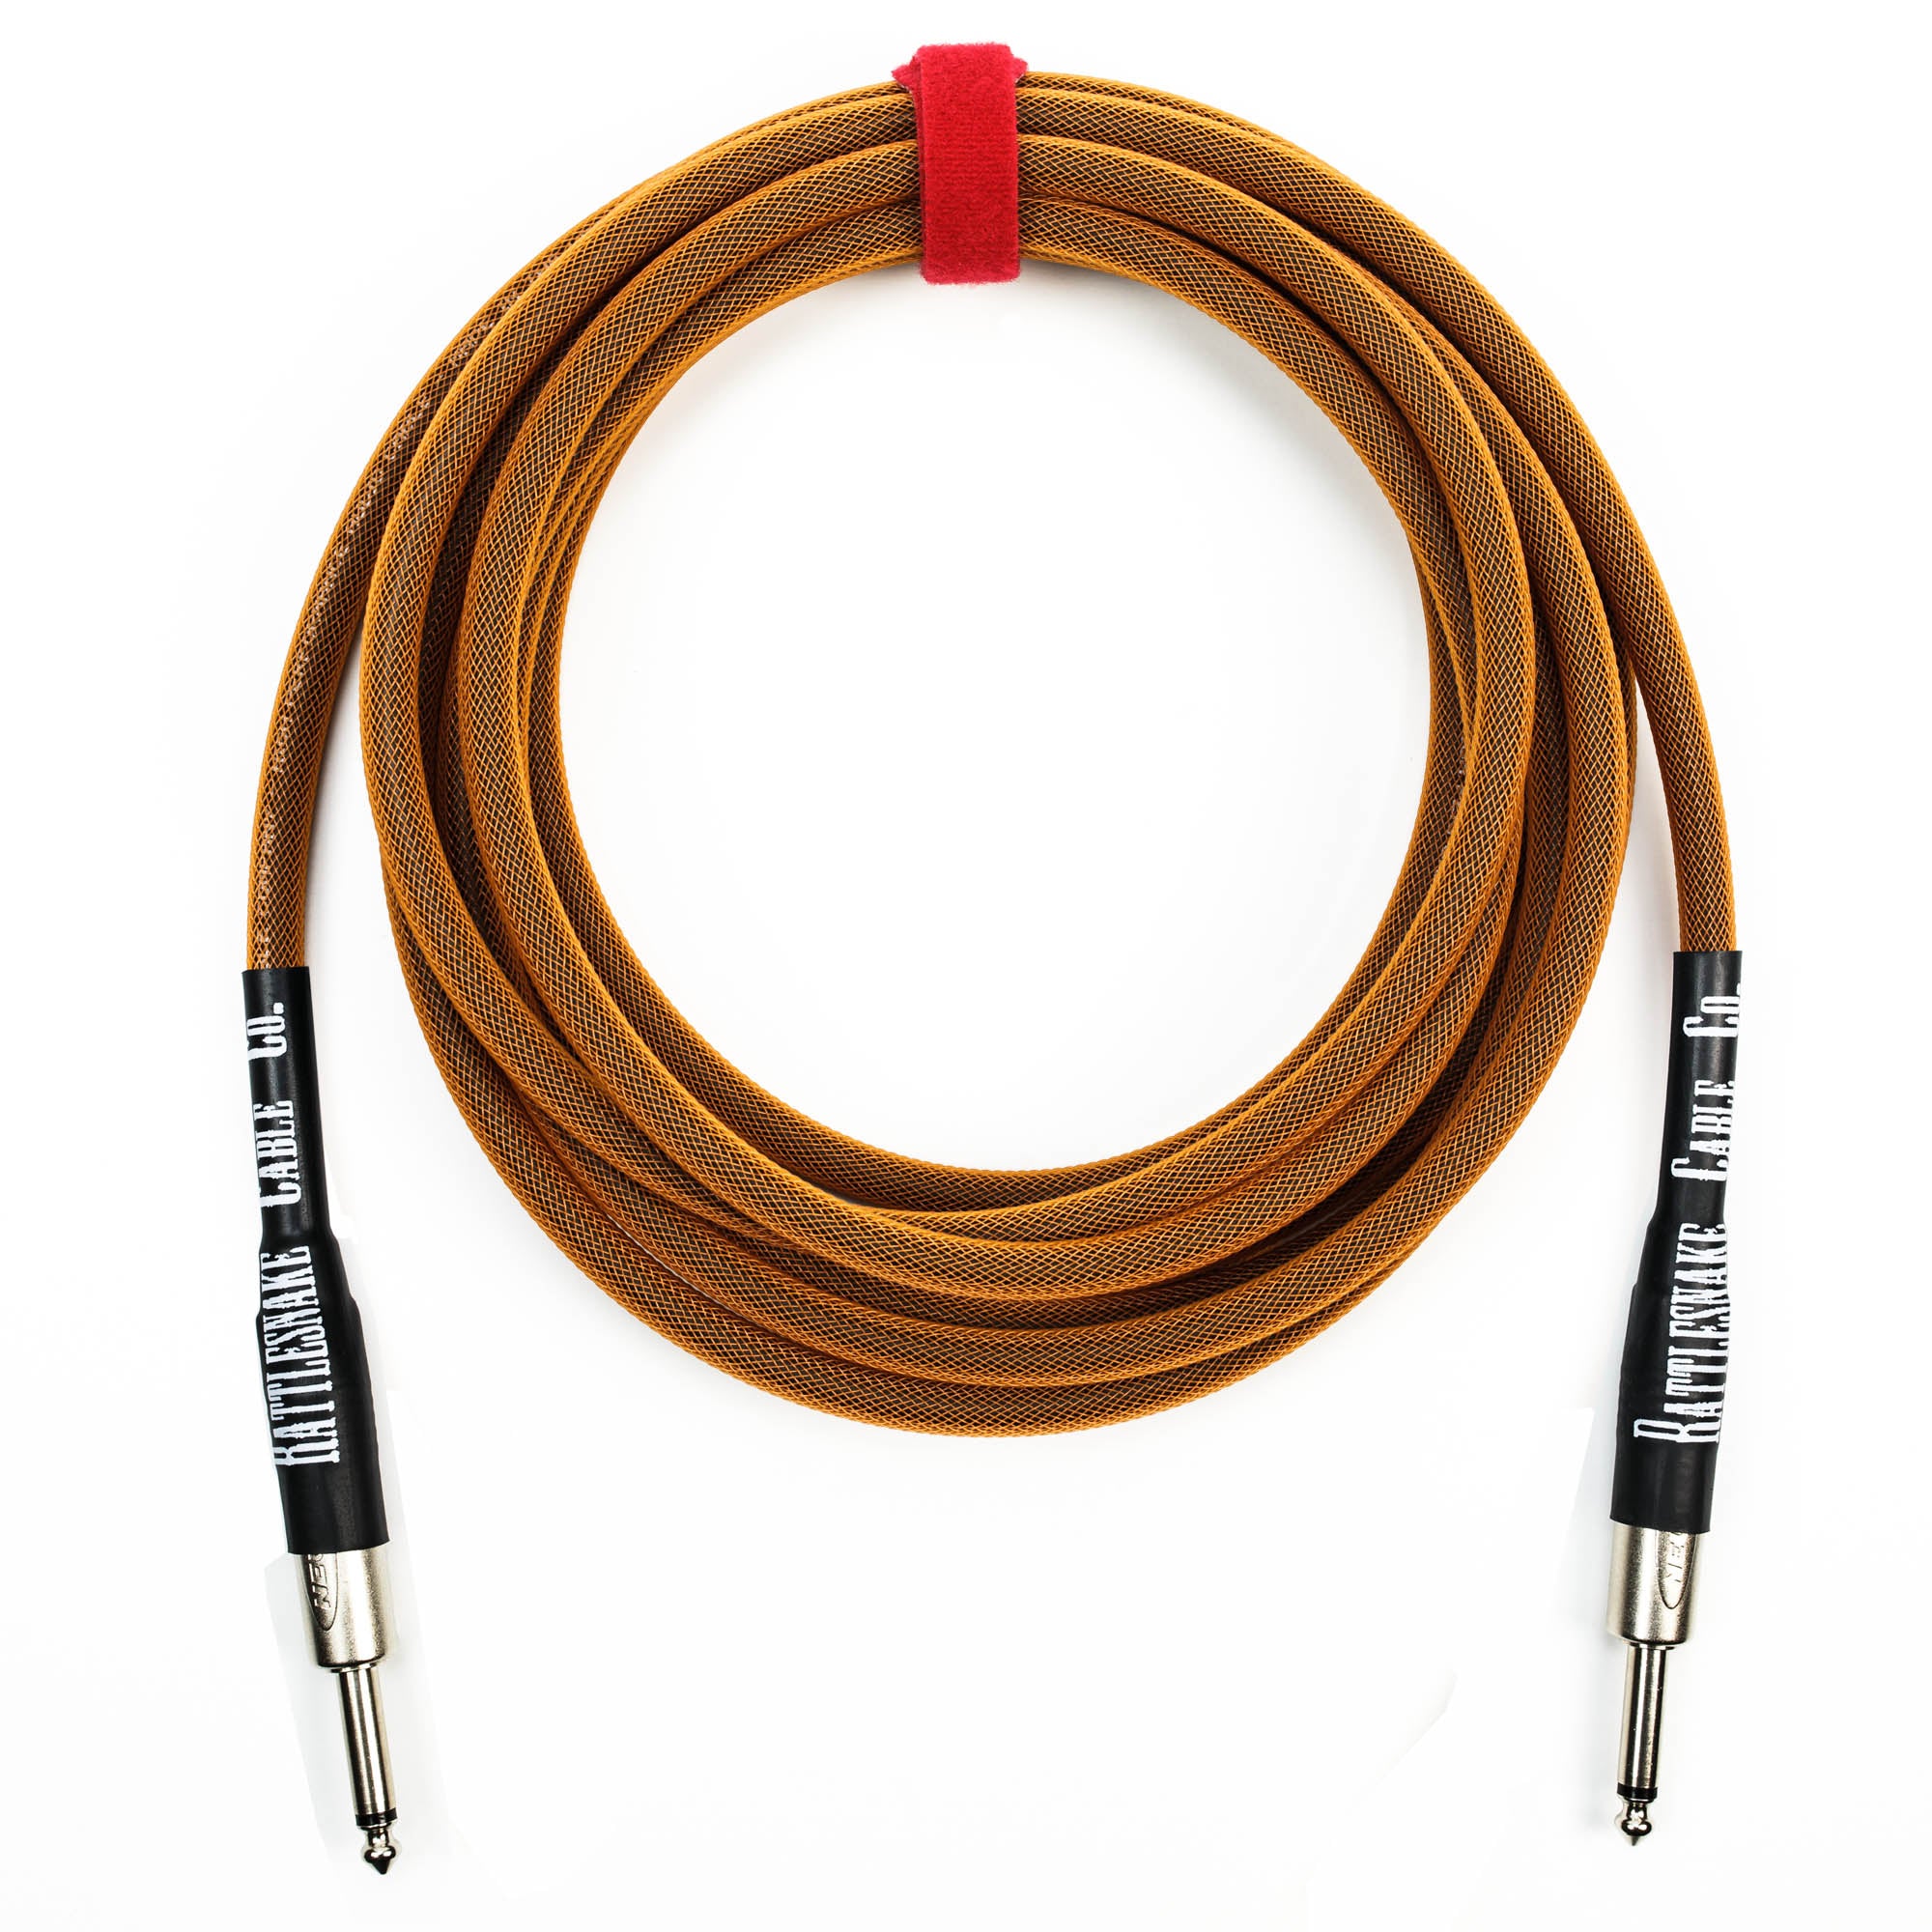 Rattlesnake Cable Company 15' Copper Guitar Cable - Straight Plugs